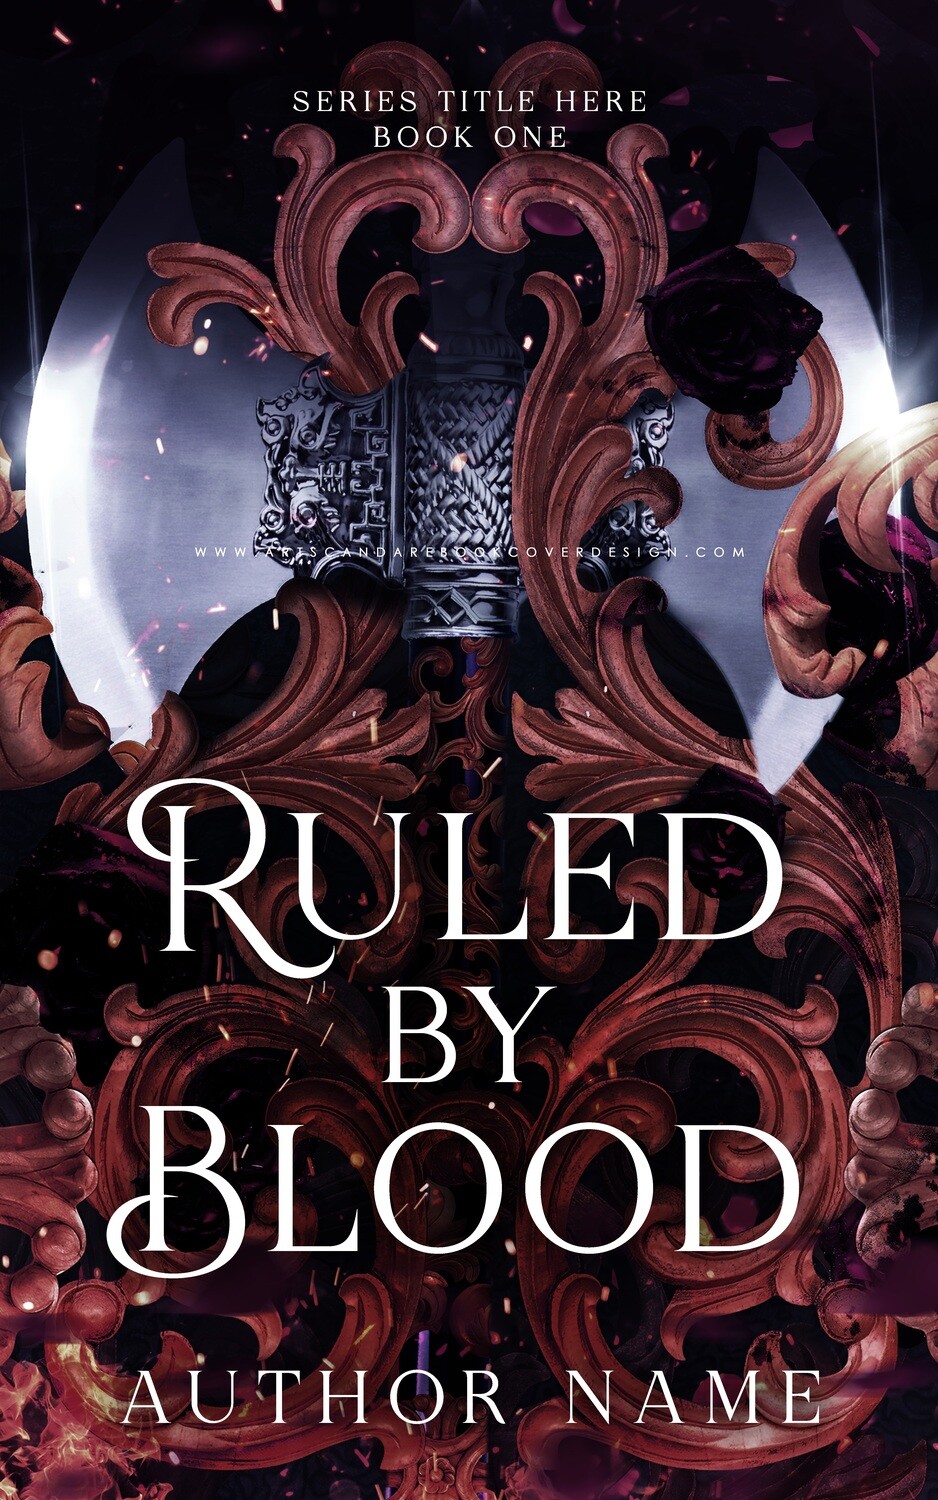 Ebook: Ruled By Blood DUOLOGY